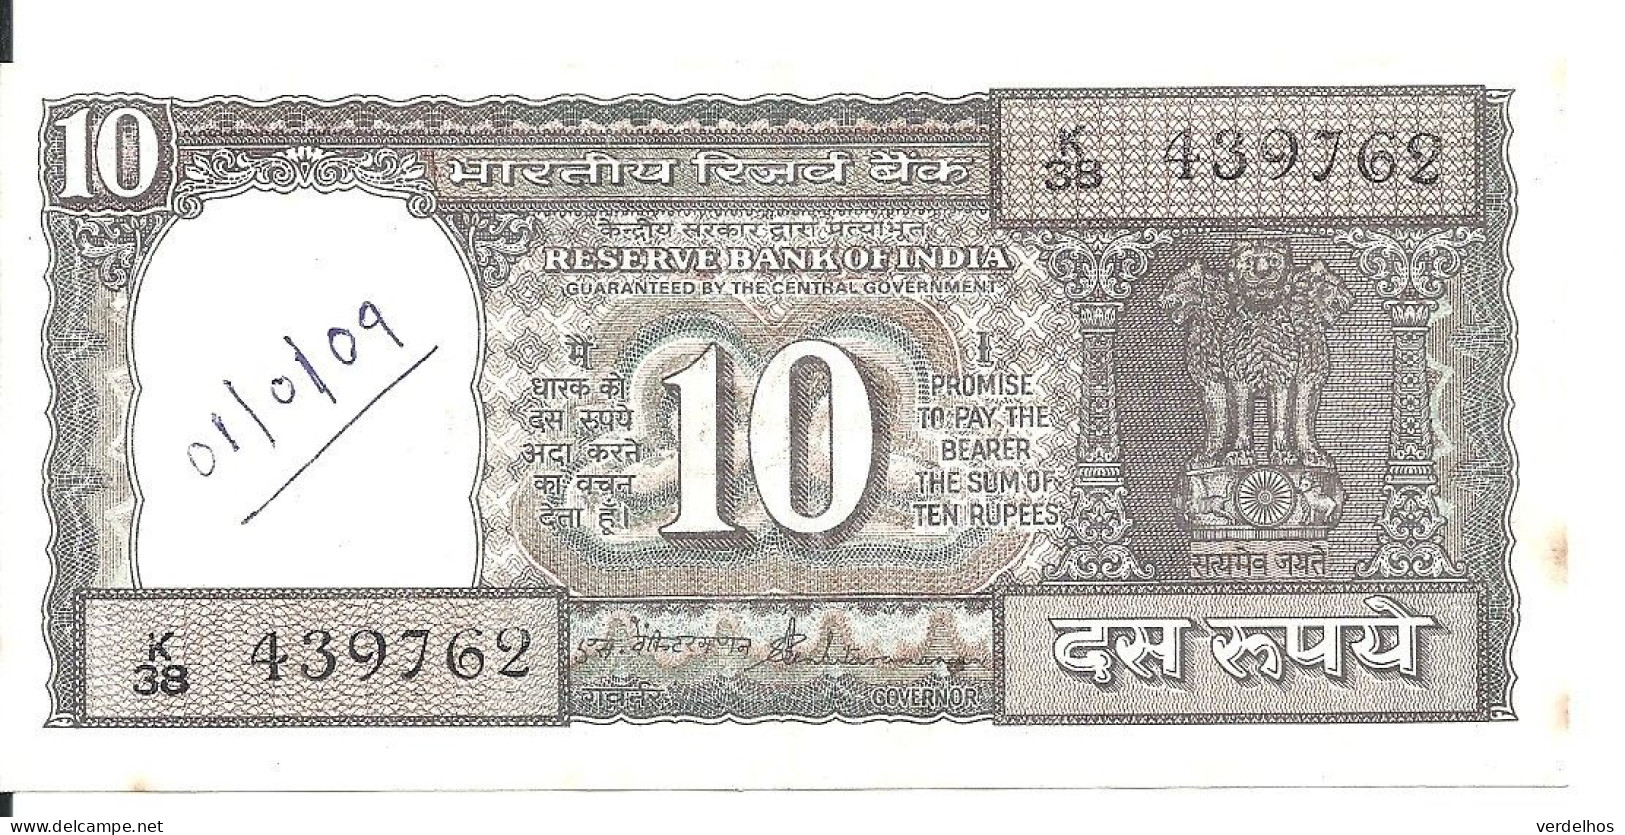 INDE 10 RUPEES ND1997 VF P 60A - Indien